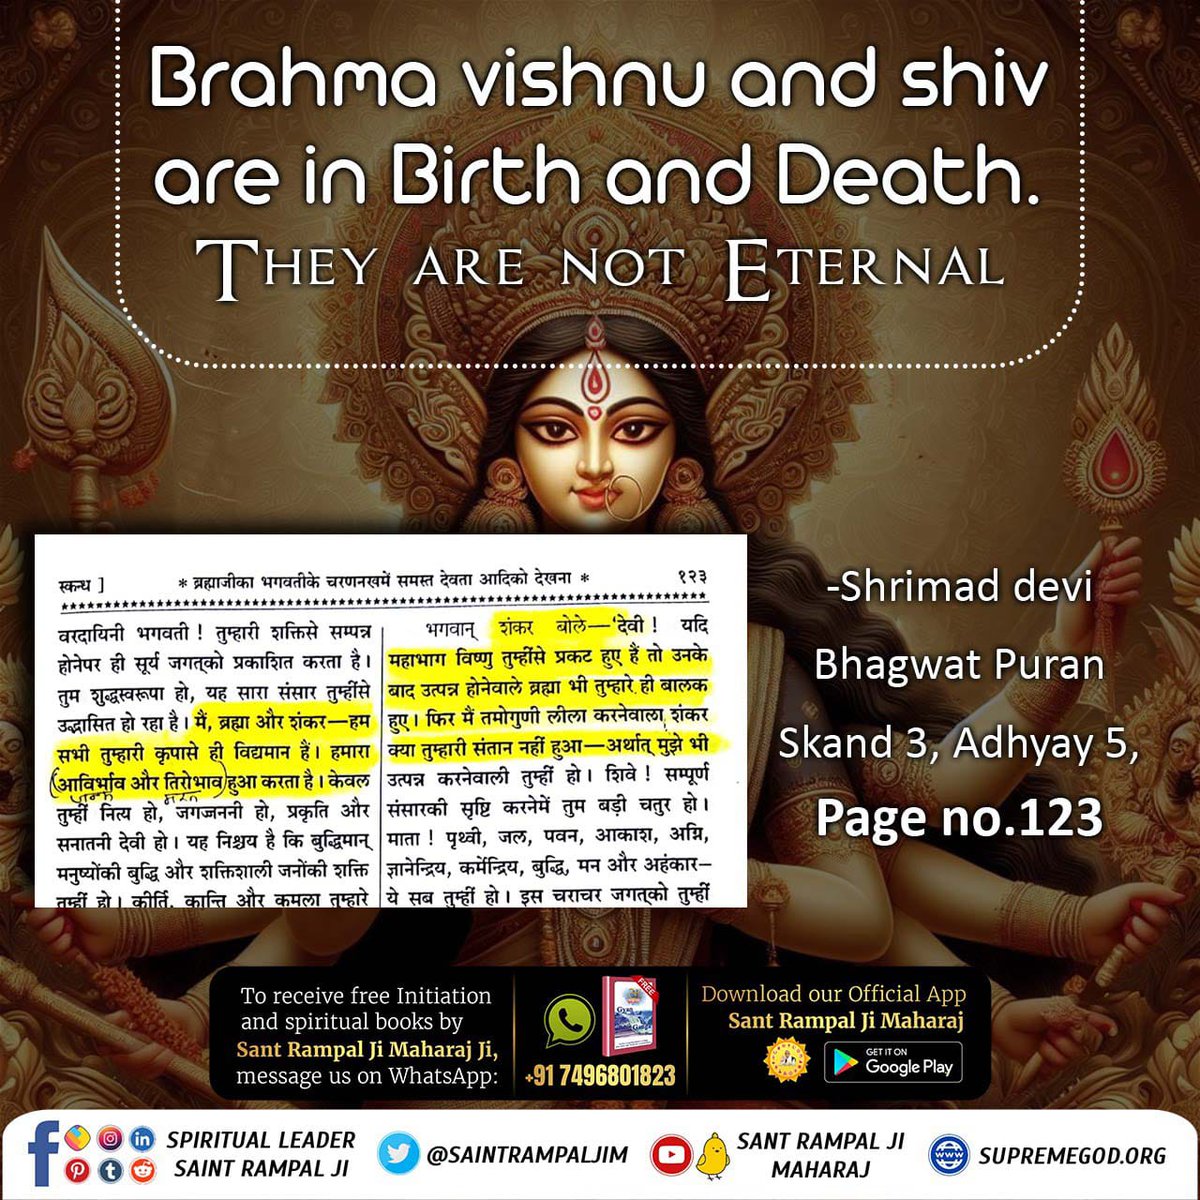 #GodNightSaturday
Brahma vishnu and shiv are in Birth and Death. THEY ARE NOT ETERNAL